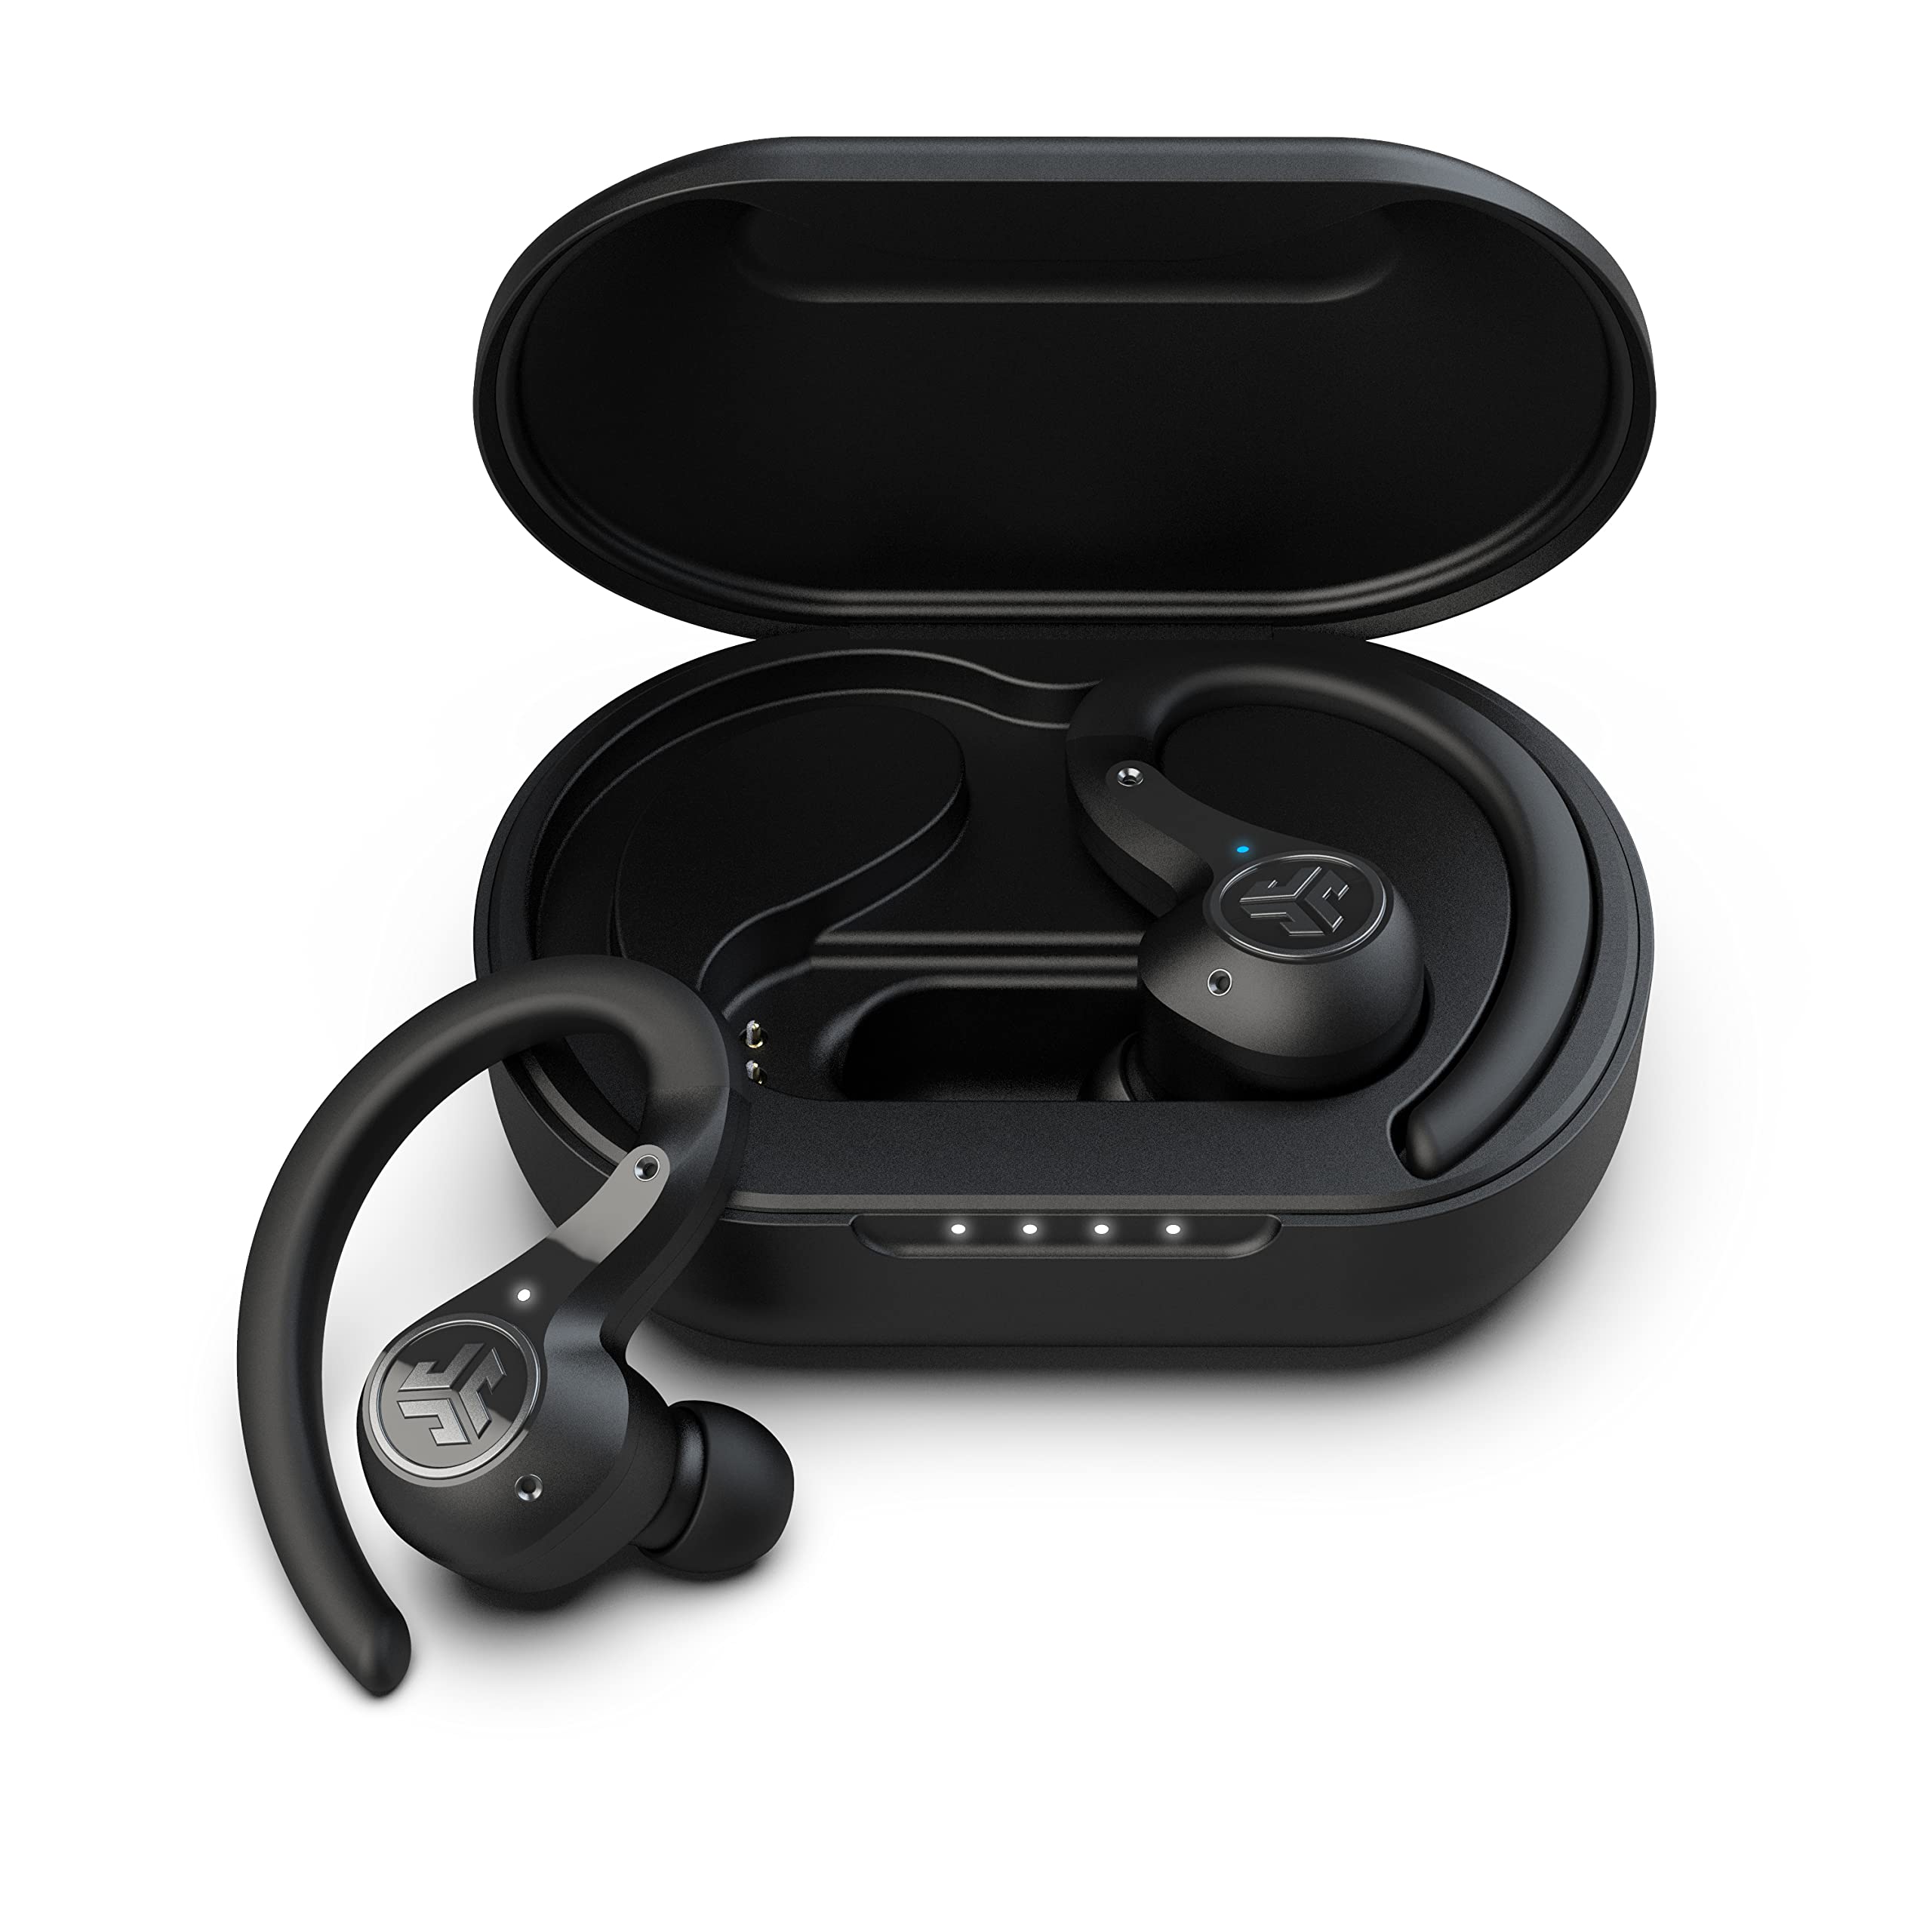 JLAB Epic Air Sport ANC True Wireless Bluetooth 5 Earbuds | Headphones for Working Out | IP66 Sweatproof | 15-Hour Battery Life, 55-Hour Charging Case | Music Controls | 3 EQ Sound Settings